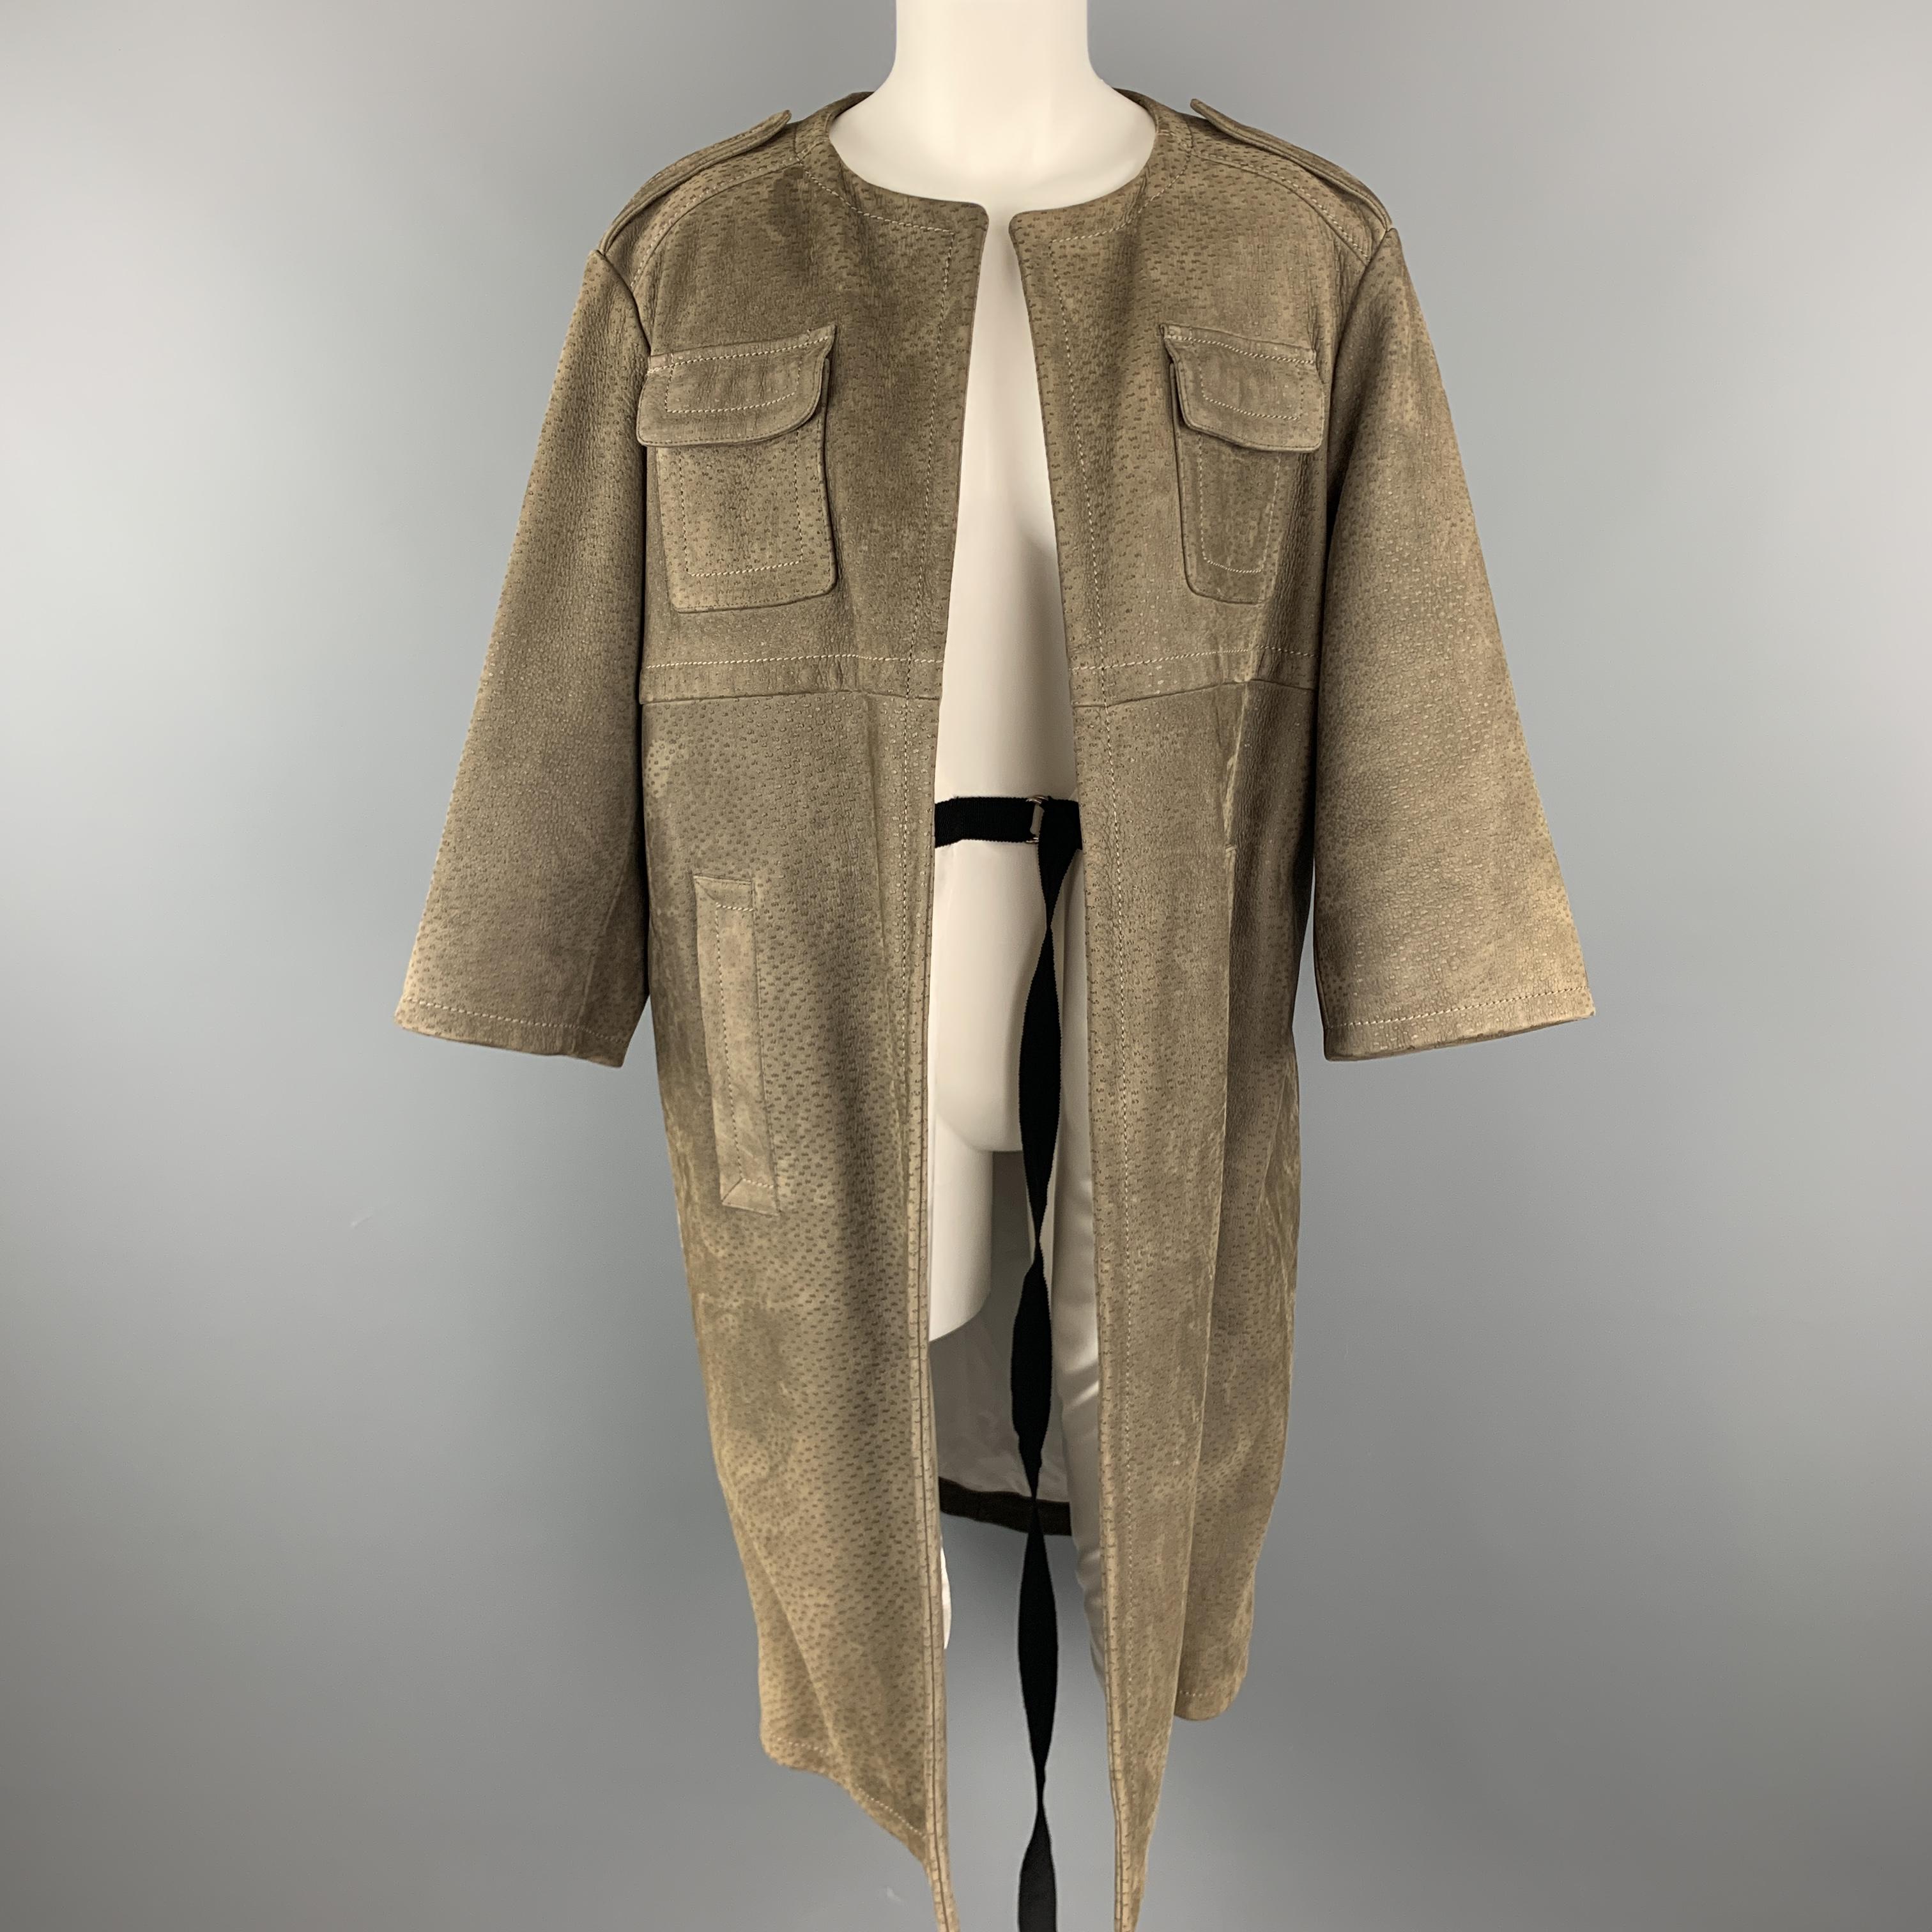 PRADA coat comes in muted olive green textured sueded leather with a collarless neckline, epaulets, drop shoulder with a cropped sleeve, patch flap pockets, inner belt, and detachable American Alligator skin dress belt. Made in Italy.

Very Good